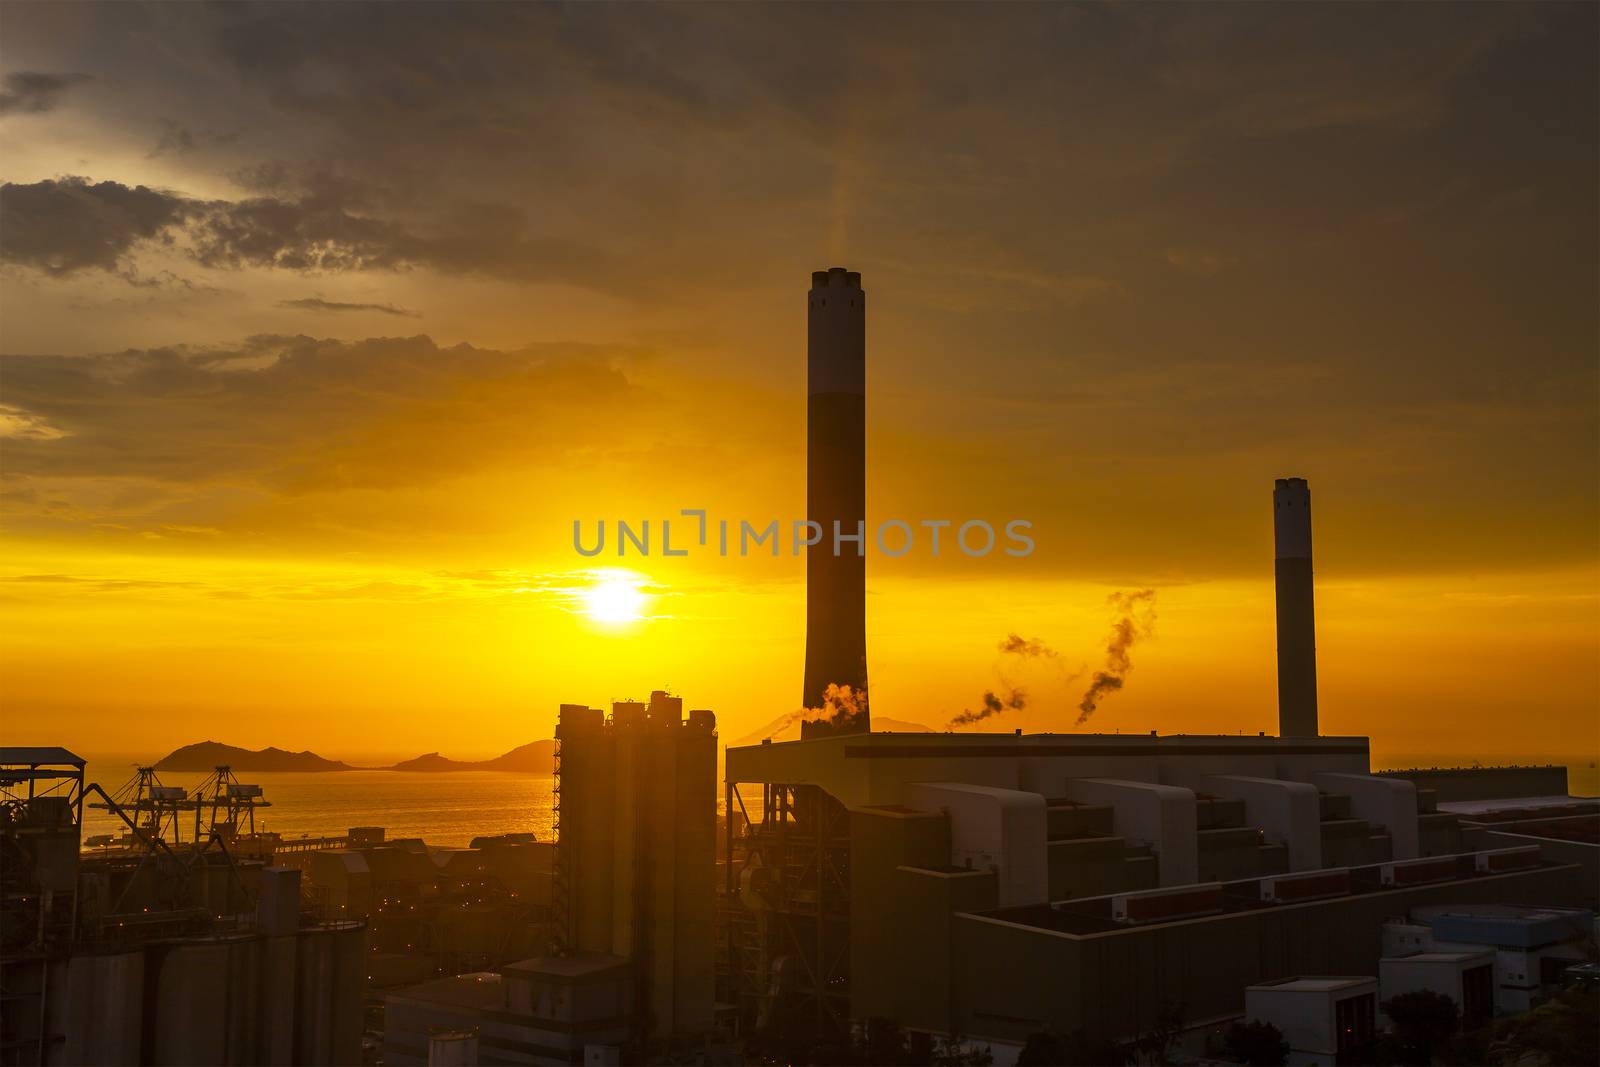 Silhouette of gas turbine electrical power plant against sunset

